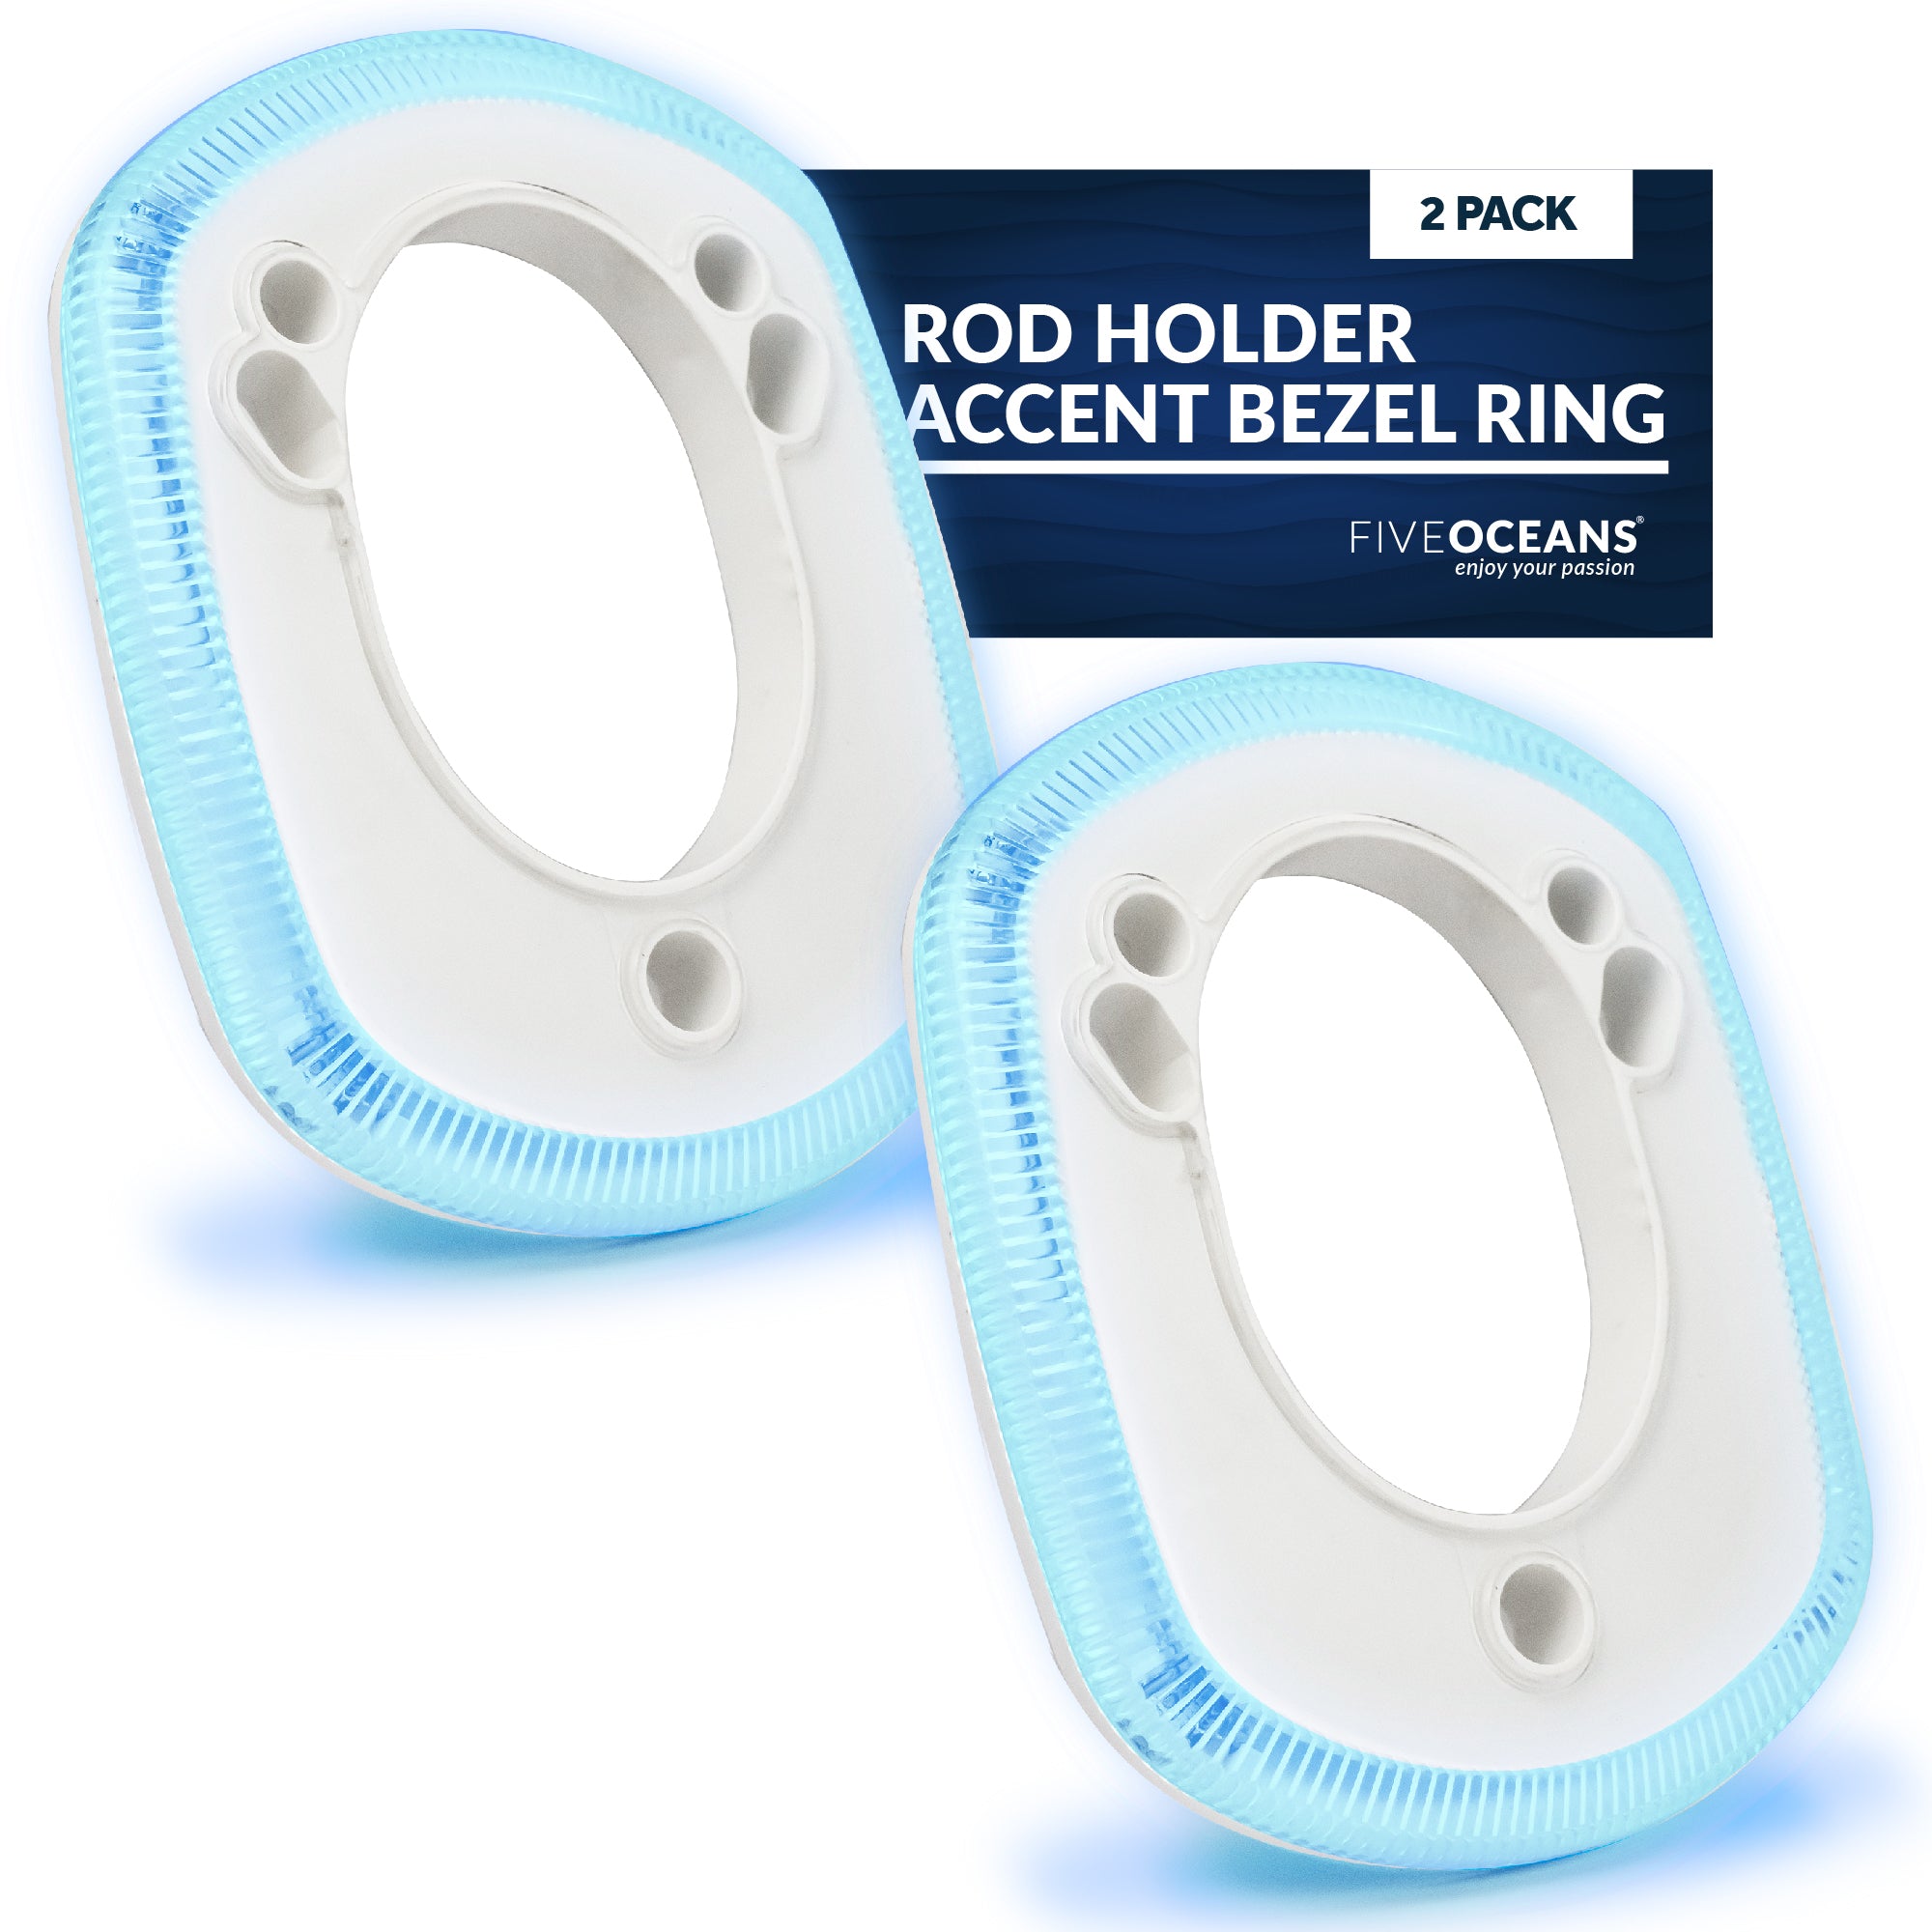 Blue LED Rod Holder Accent Bezel Ring, Fits All Five Oceans/Most Standard Rod Holders, Grade Marine Durable Materials, 12 Volts, 2-Pack, FO-4433-M2